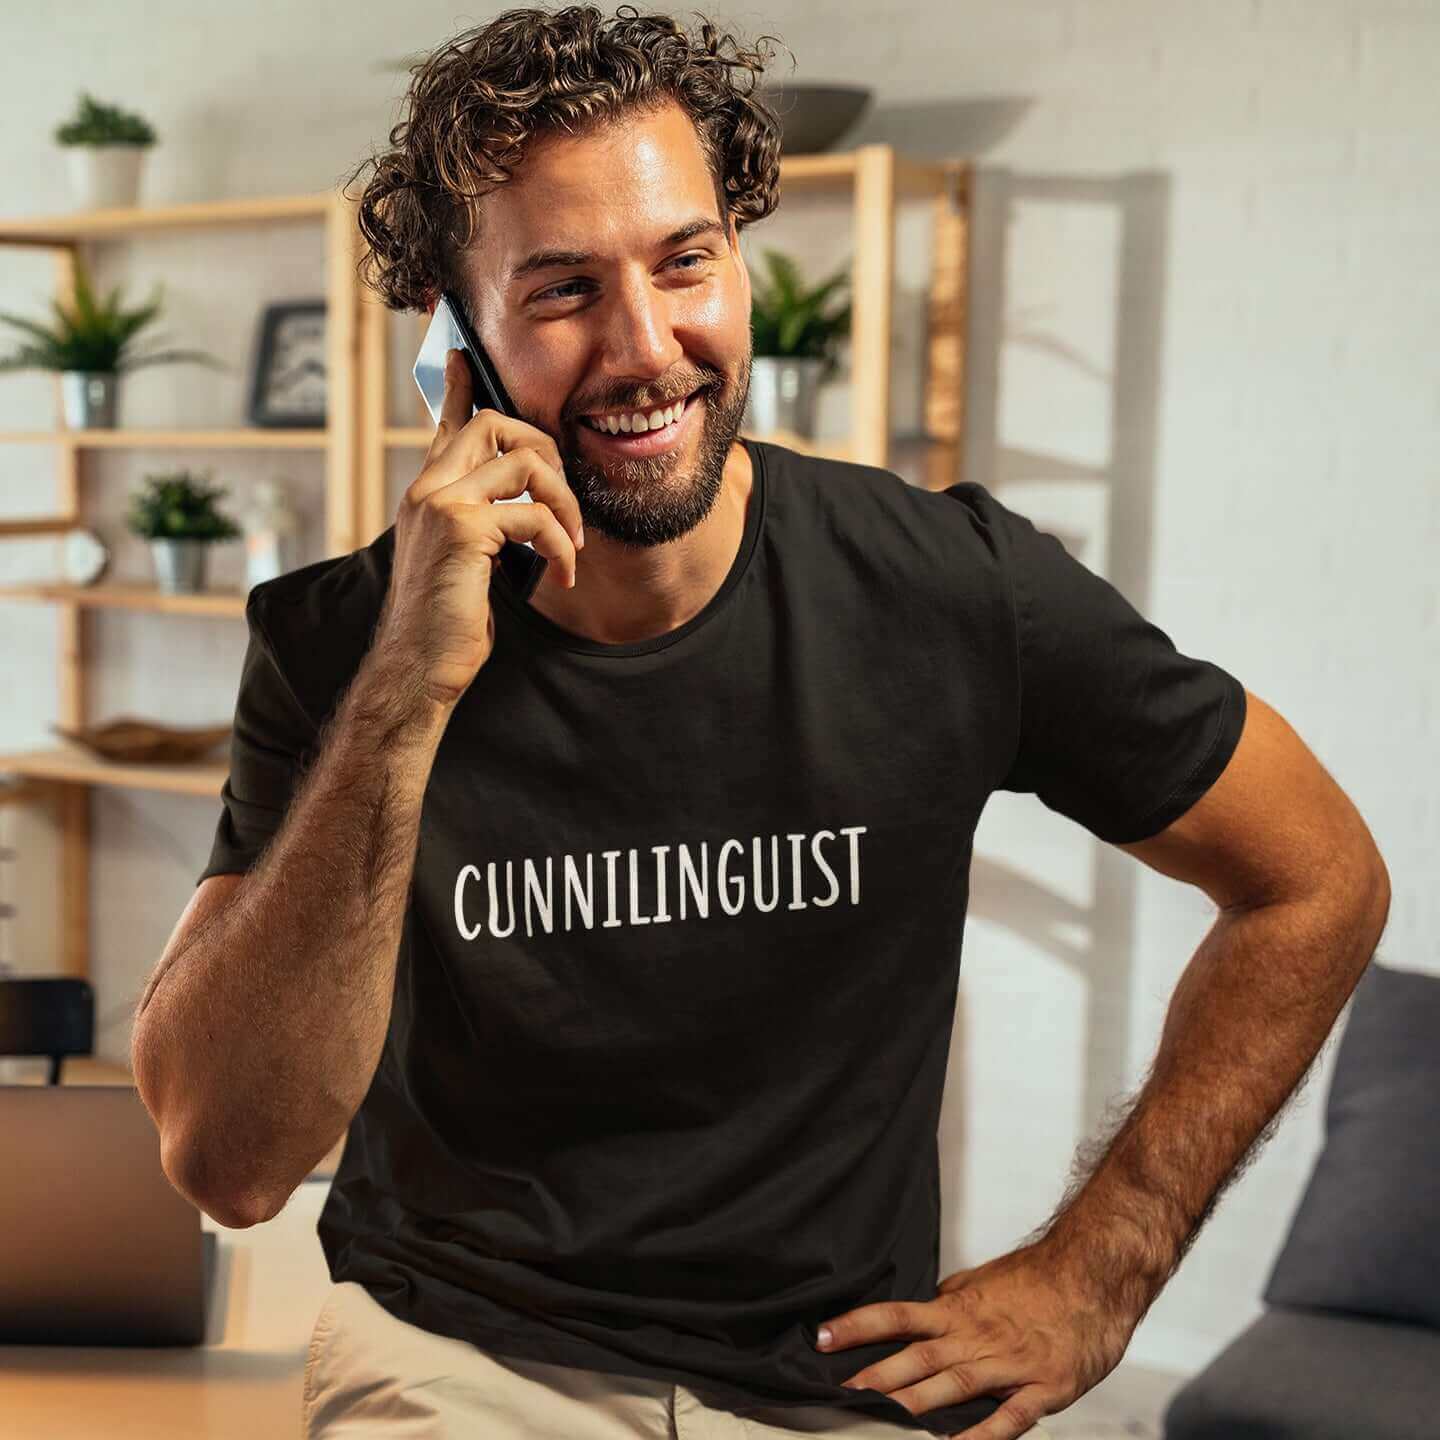 man wearing tshirt that says cunnilinguist sexual humor witticismsrus